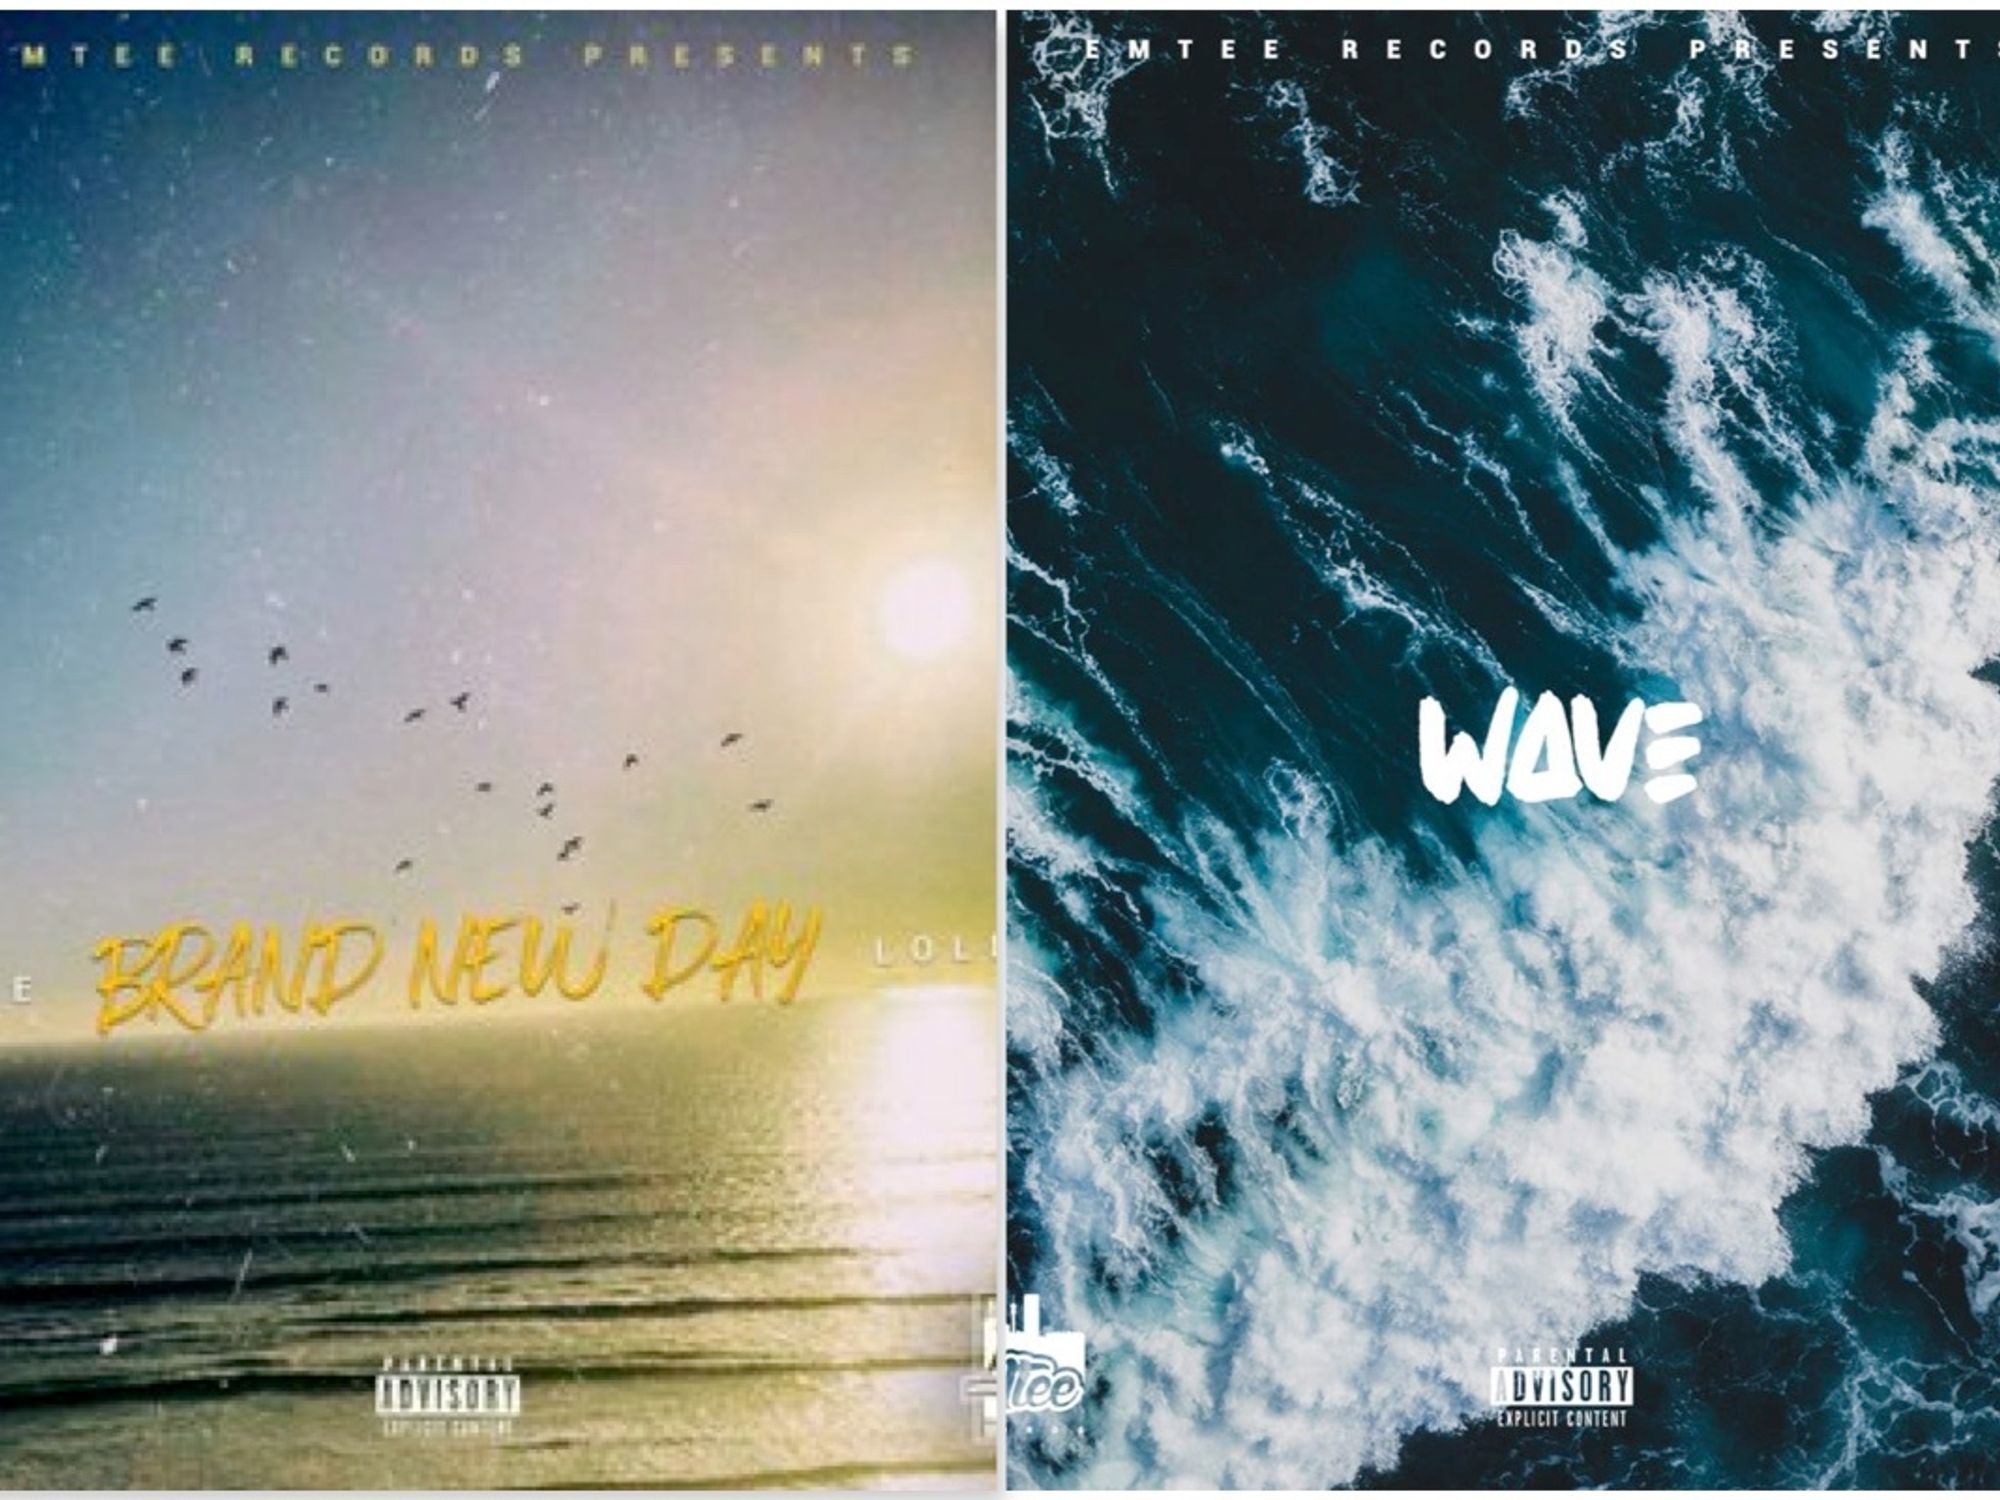 Listen to Emtee’s 2 New Songs ‘Wave’ and ‘Brand New Day’